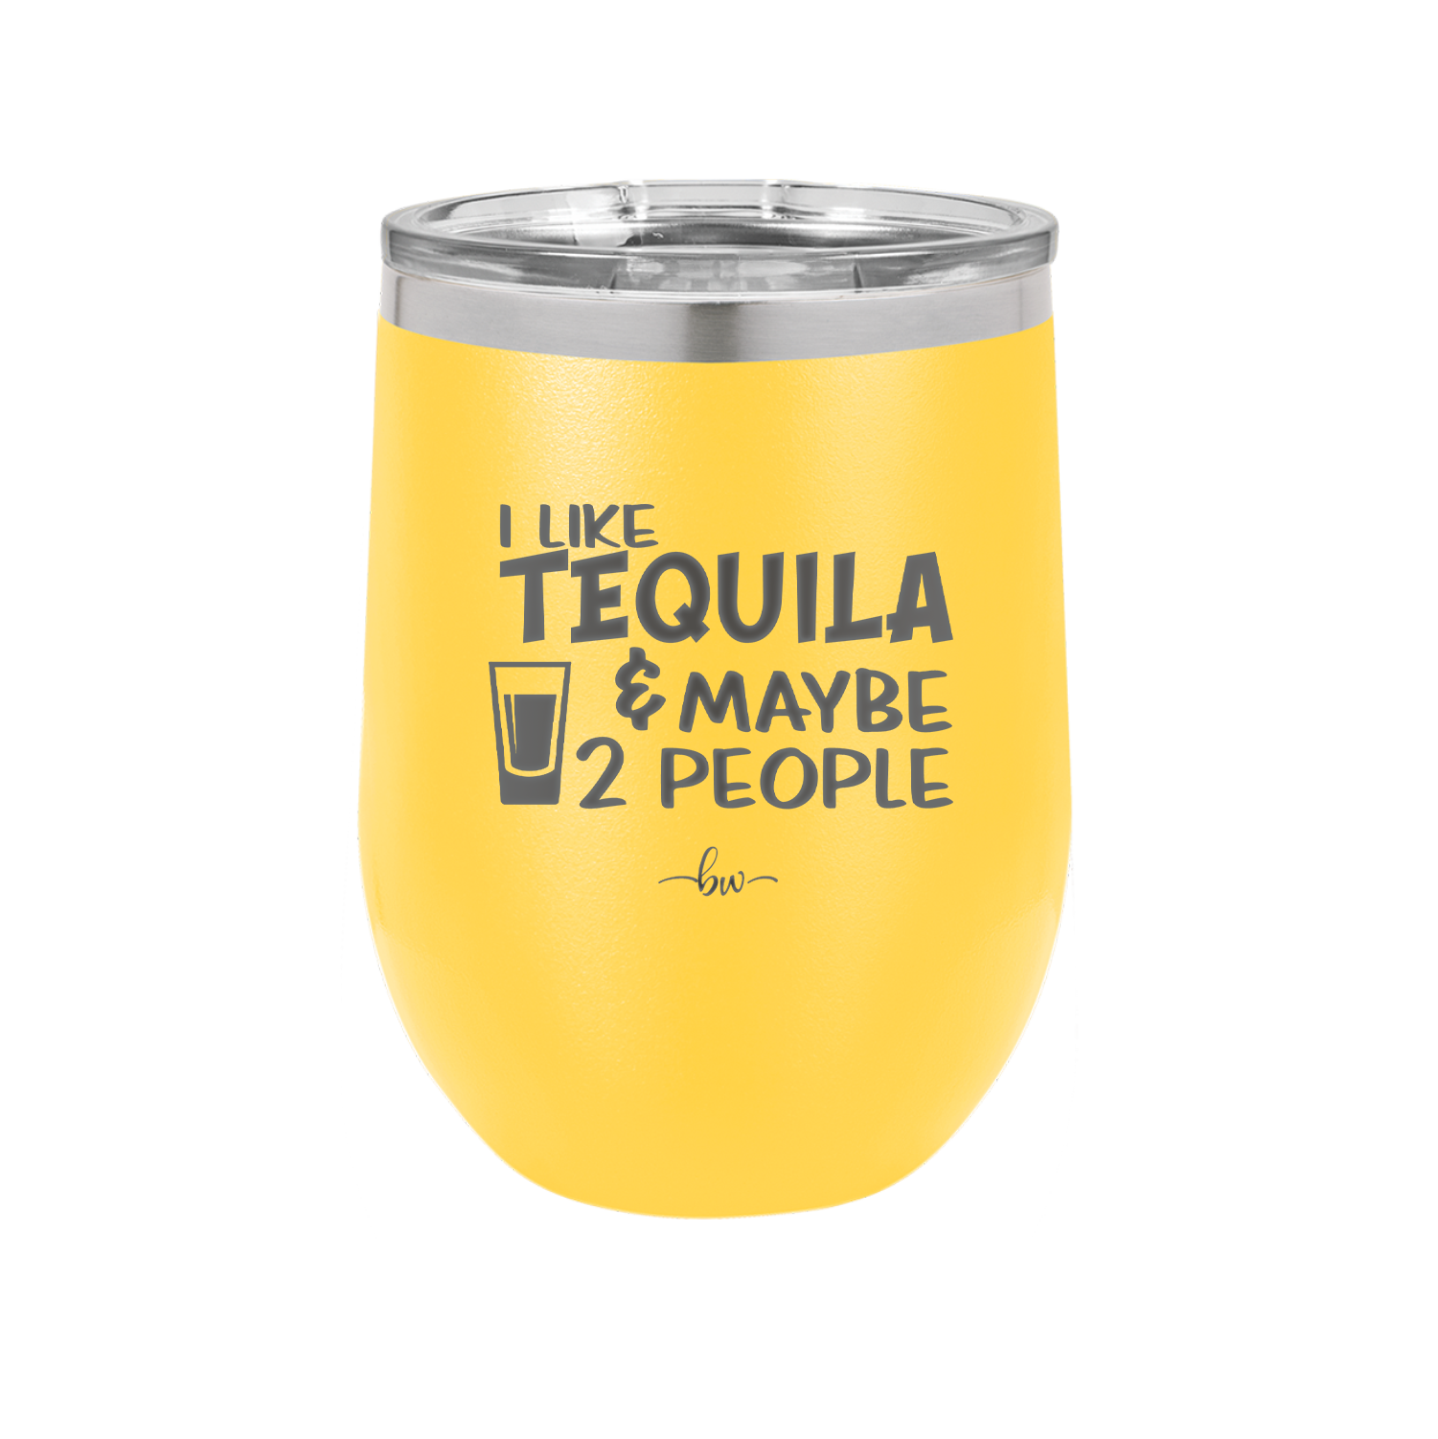 I Like Tequila and Maybe 2 People - Laser Engraved Stainless Steel Drinkware - 2265 -